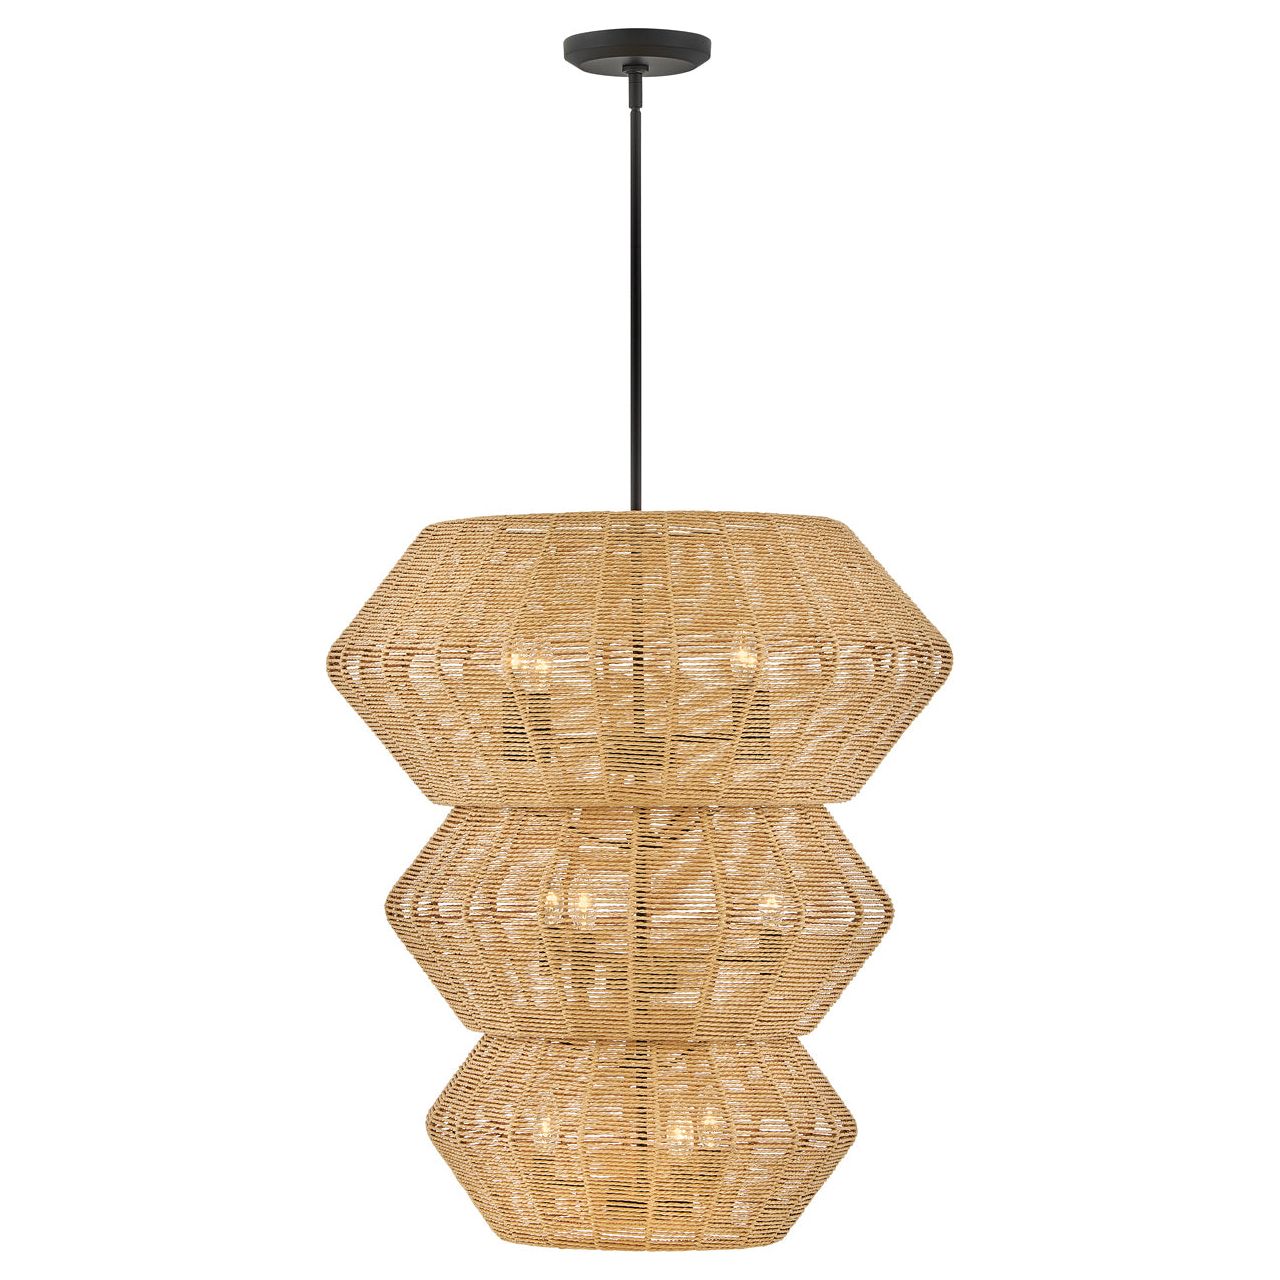 Luca Double Extra Large Multi Tier Chandelier